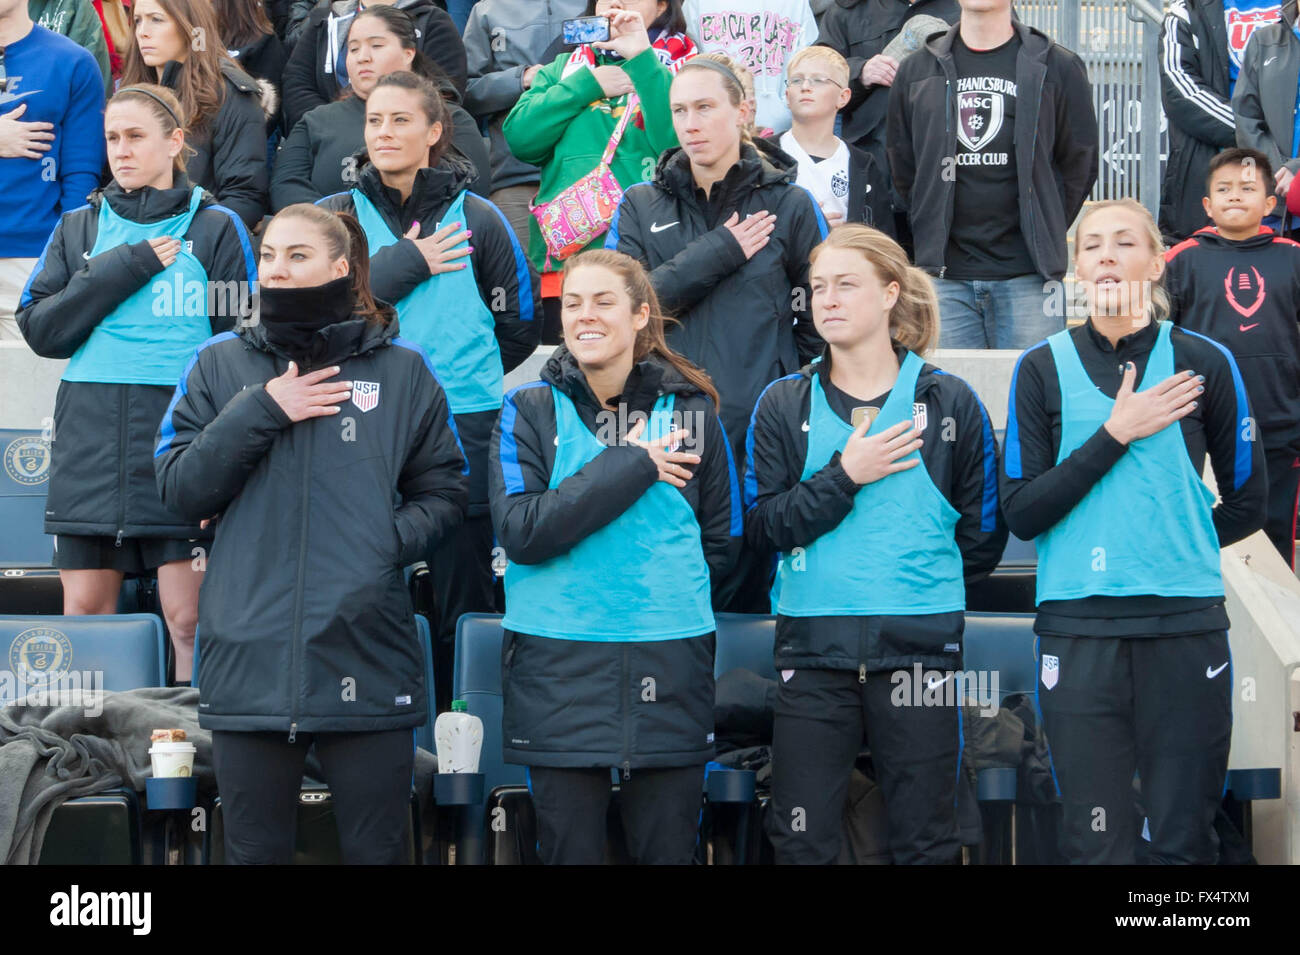 Women's football / soccer - Chester, Pennsylvania, USA. 10th April 2016. Hope Solo, Allie Long and other members of the United States Women's soccer team during the Star Spangled Banner national anthem Credit:  Don Mennig/Alamy Live News Stock Photo